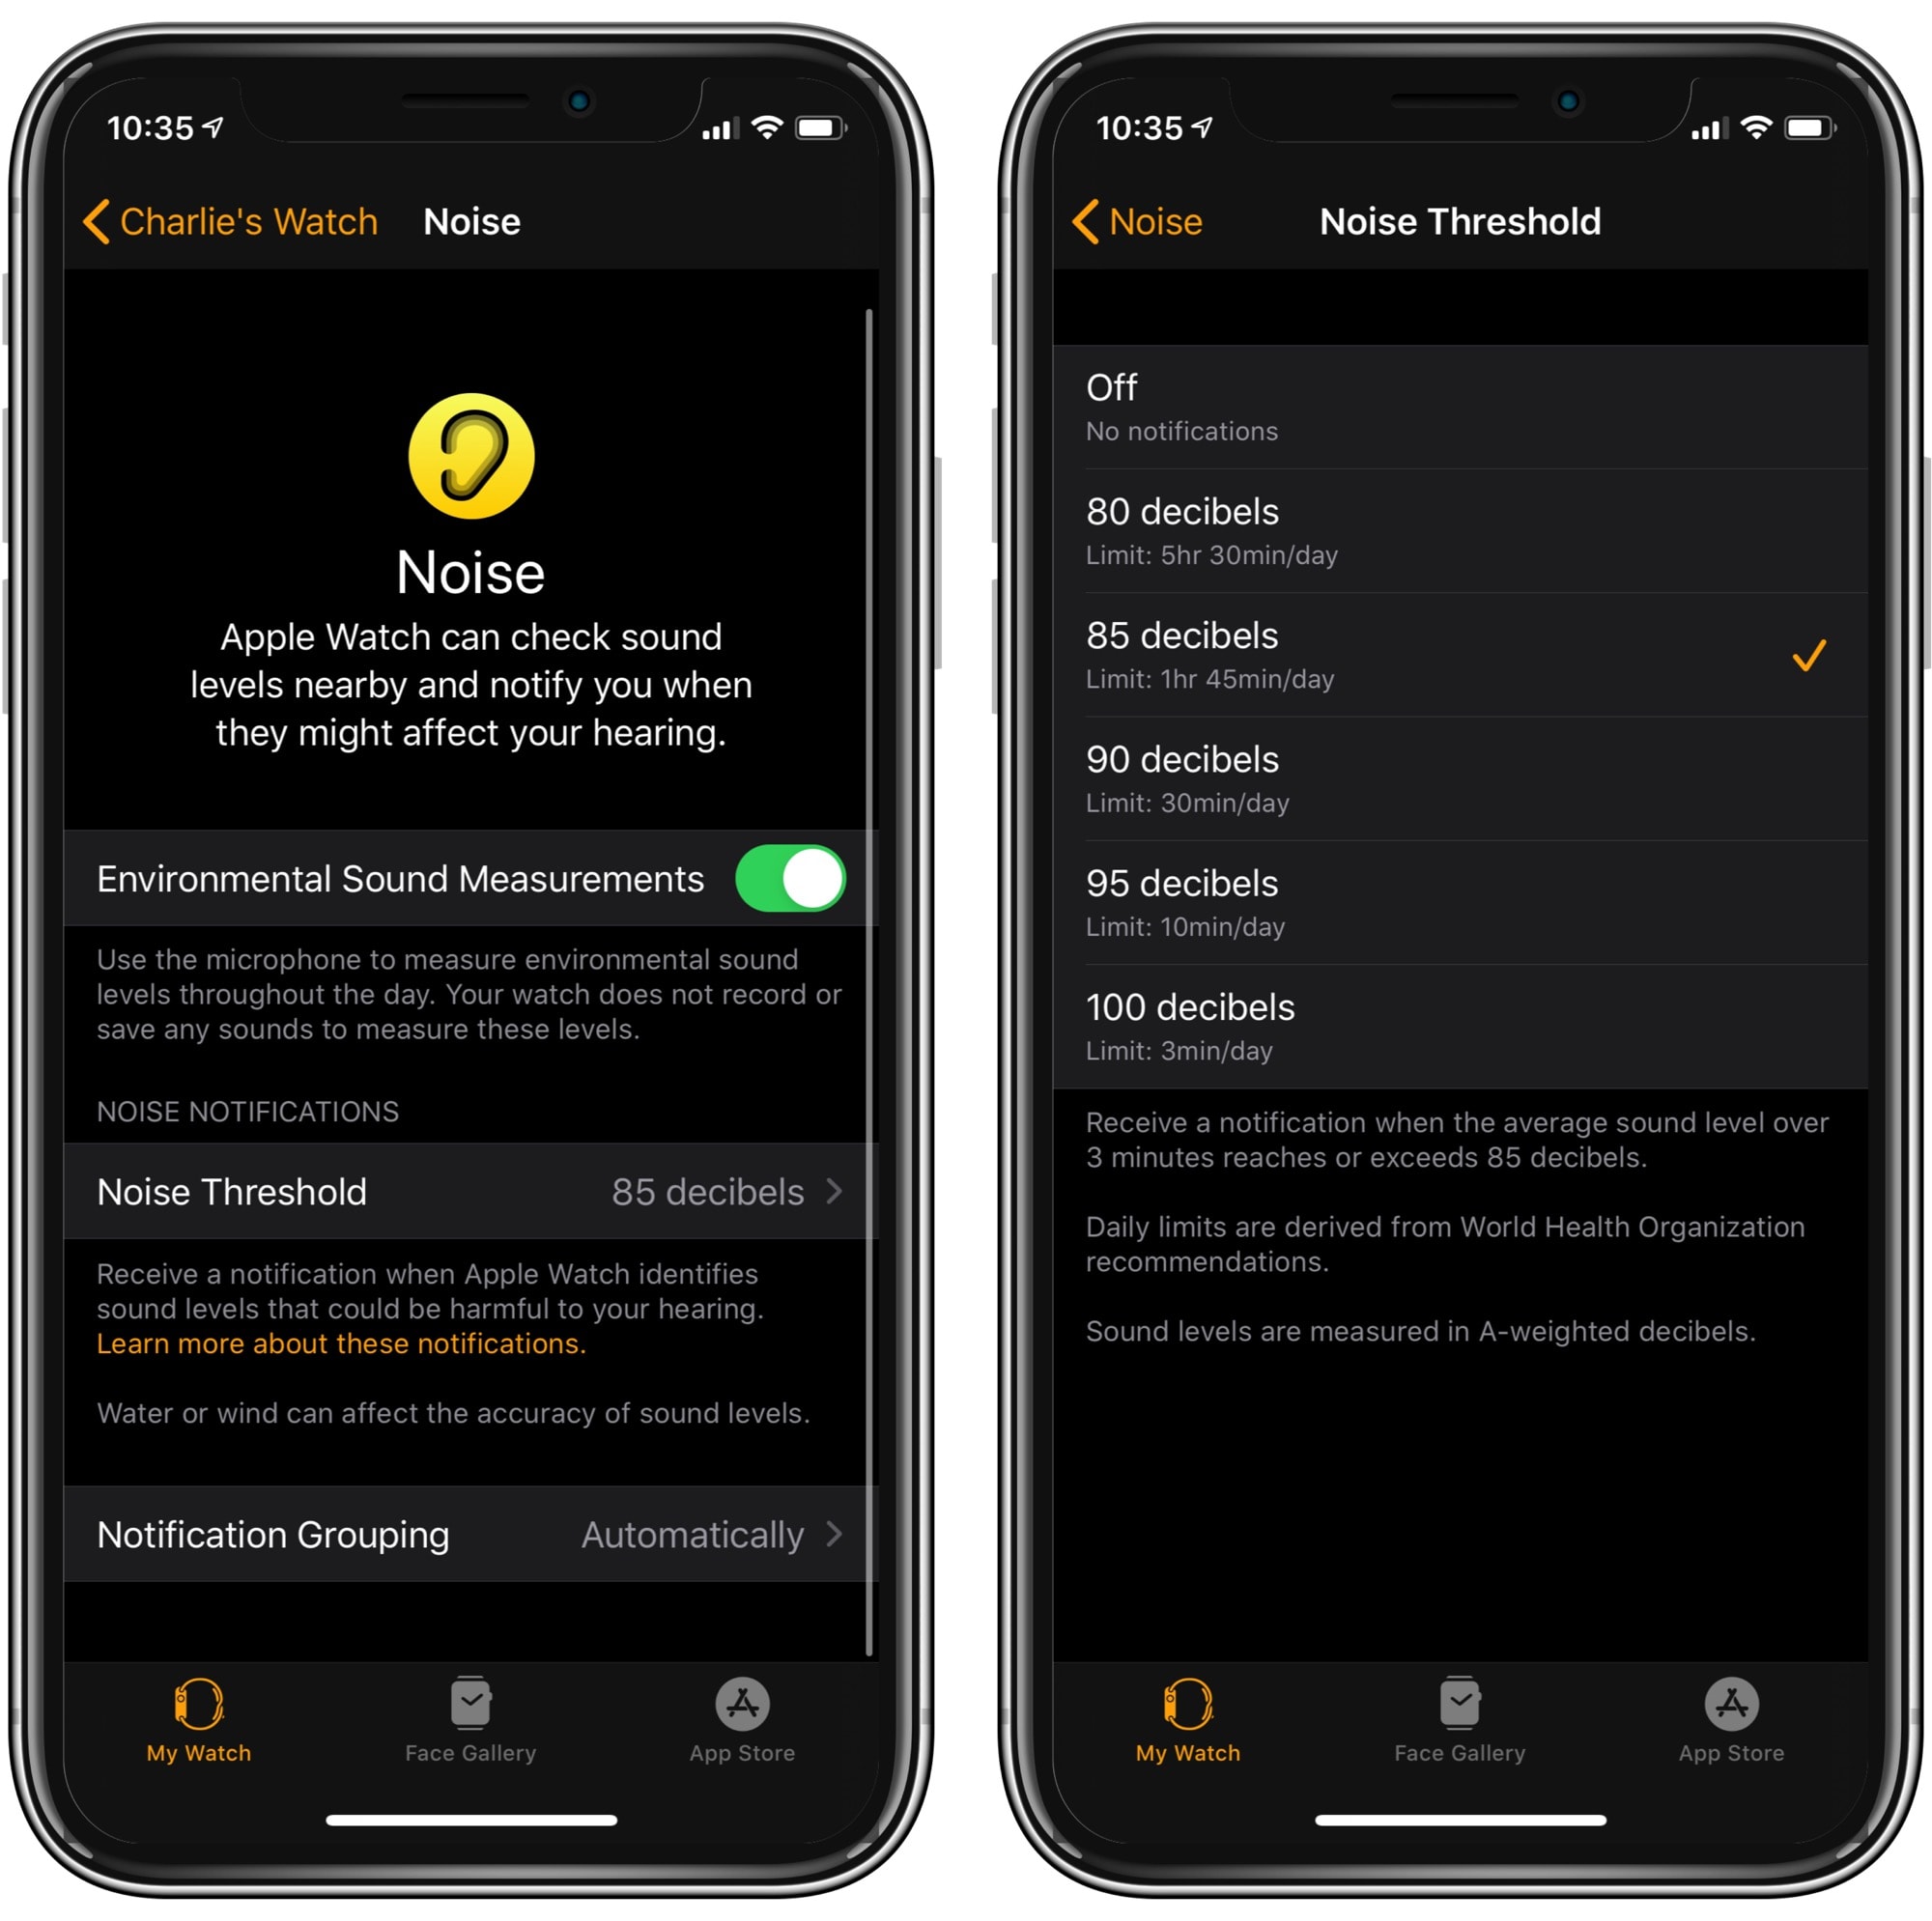 Apple Watch’s Noise settings on your iPhone. 